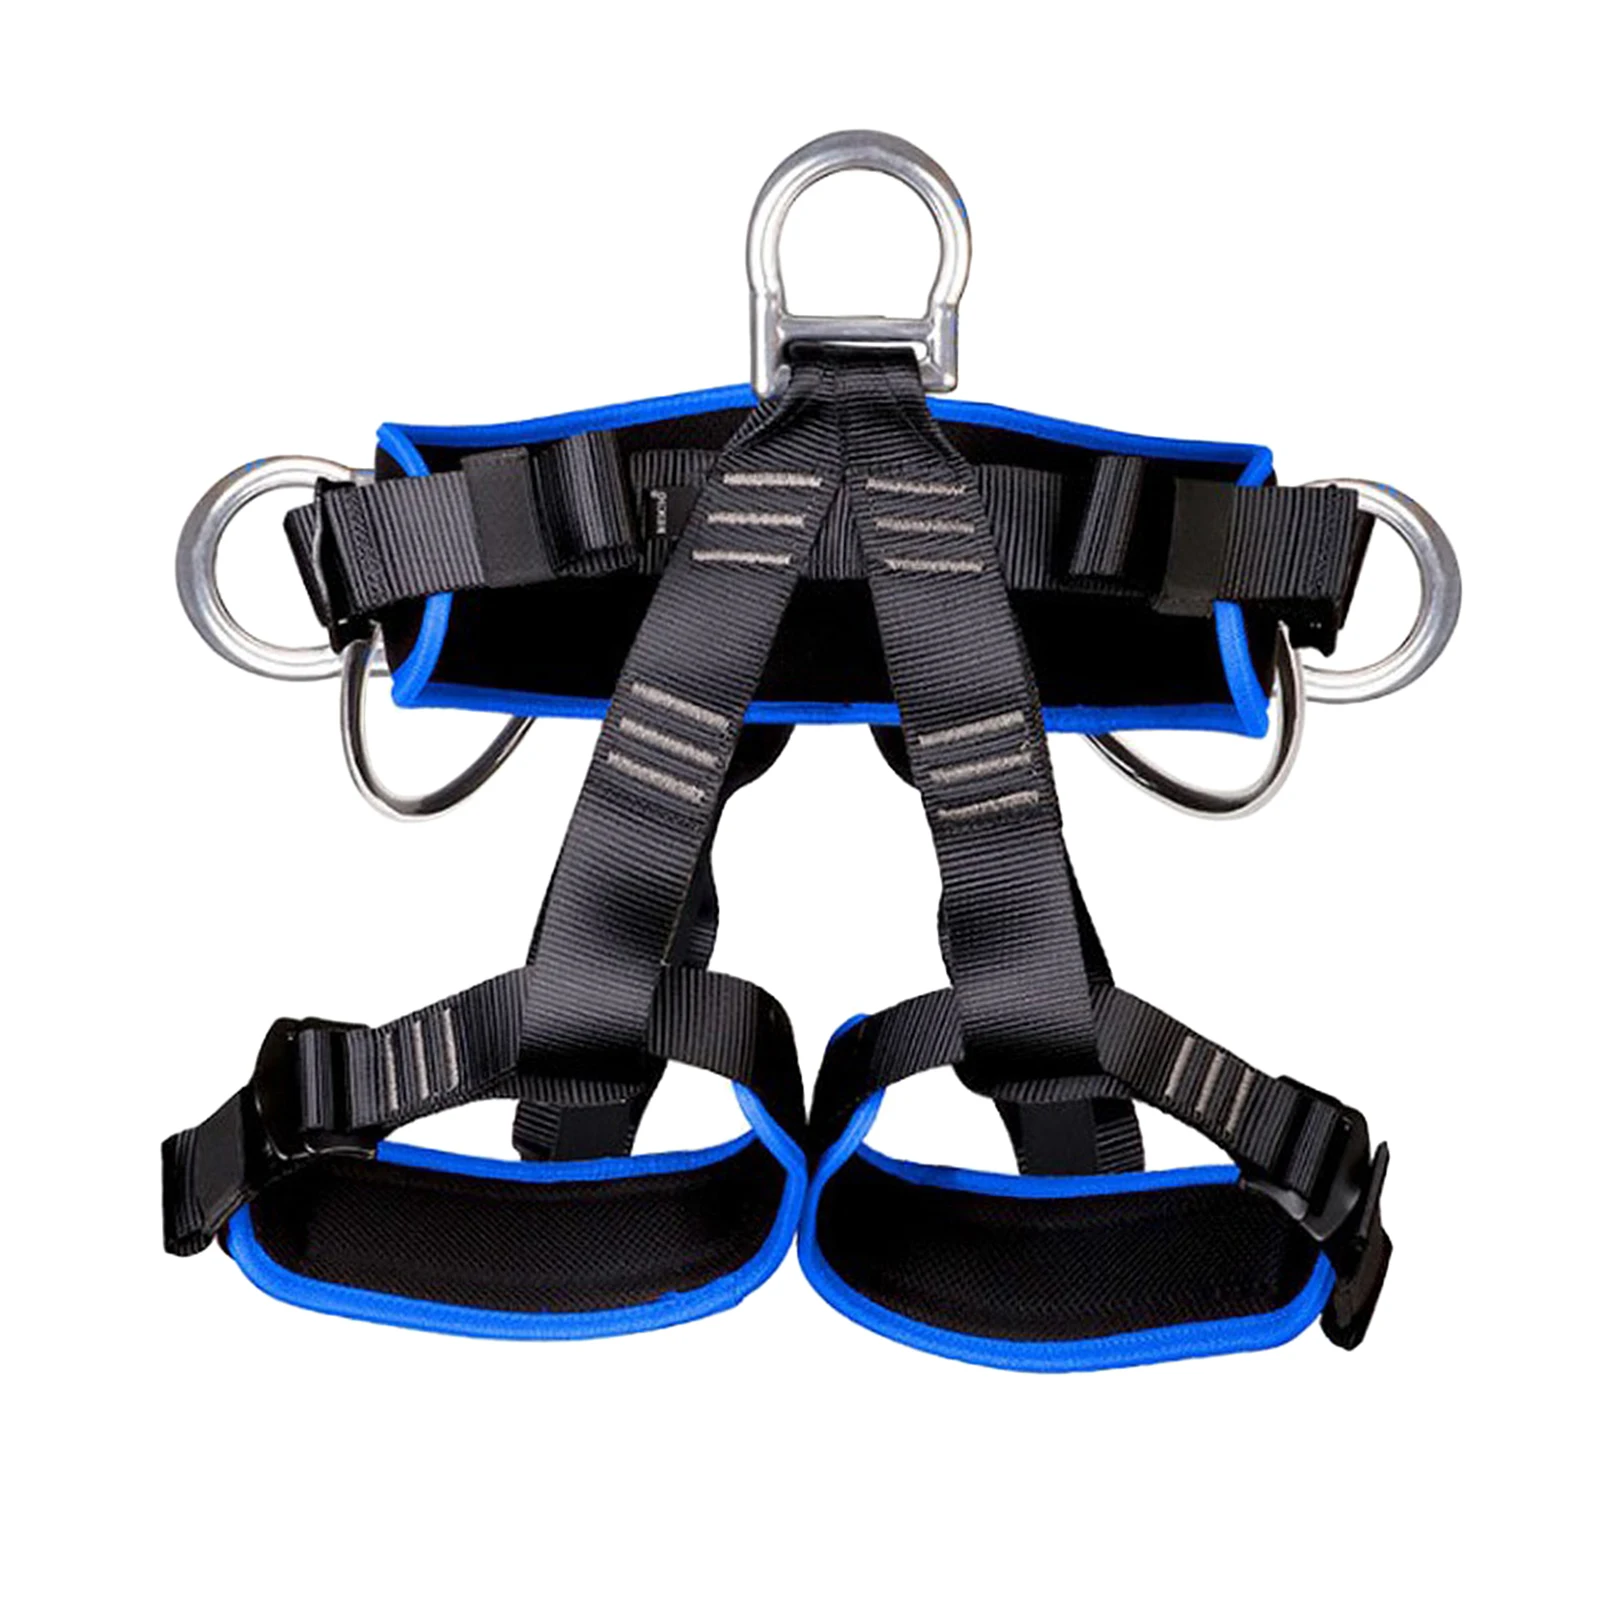 Outdoor Rock Safety Climbing Rappelling Harness Seat Belt Fall Protection Gear 